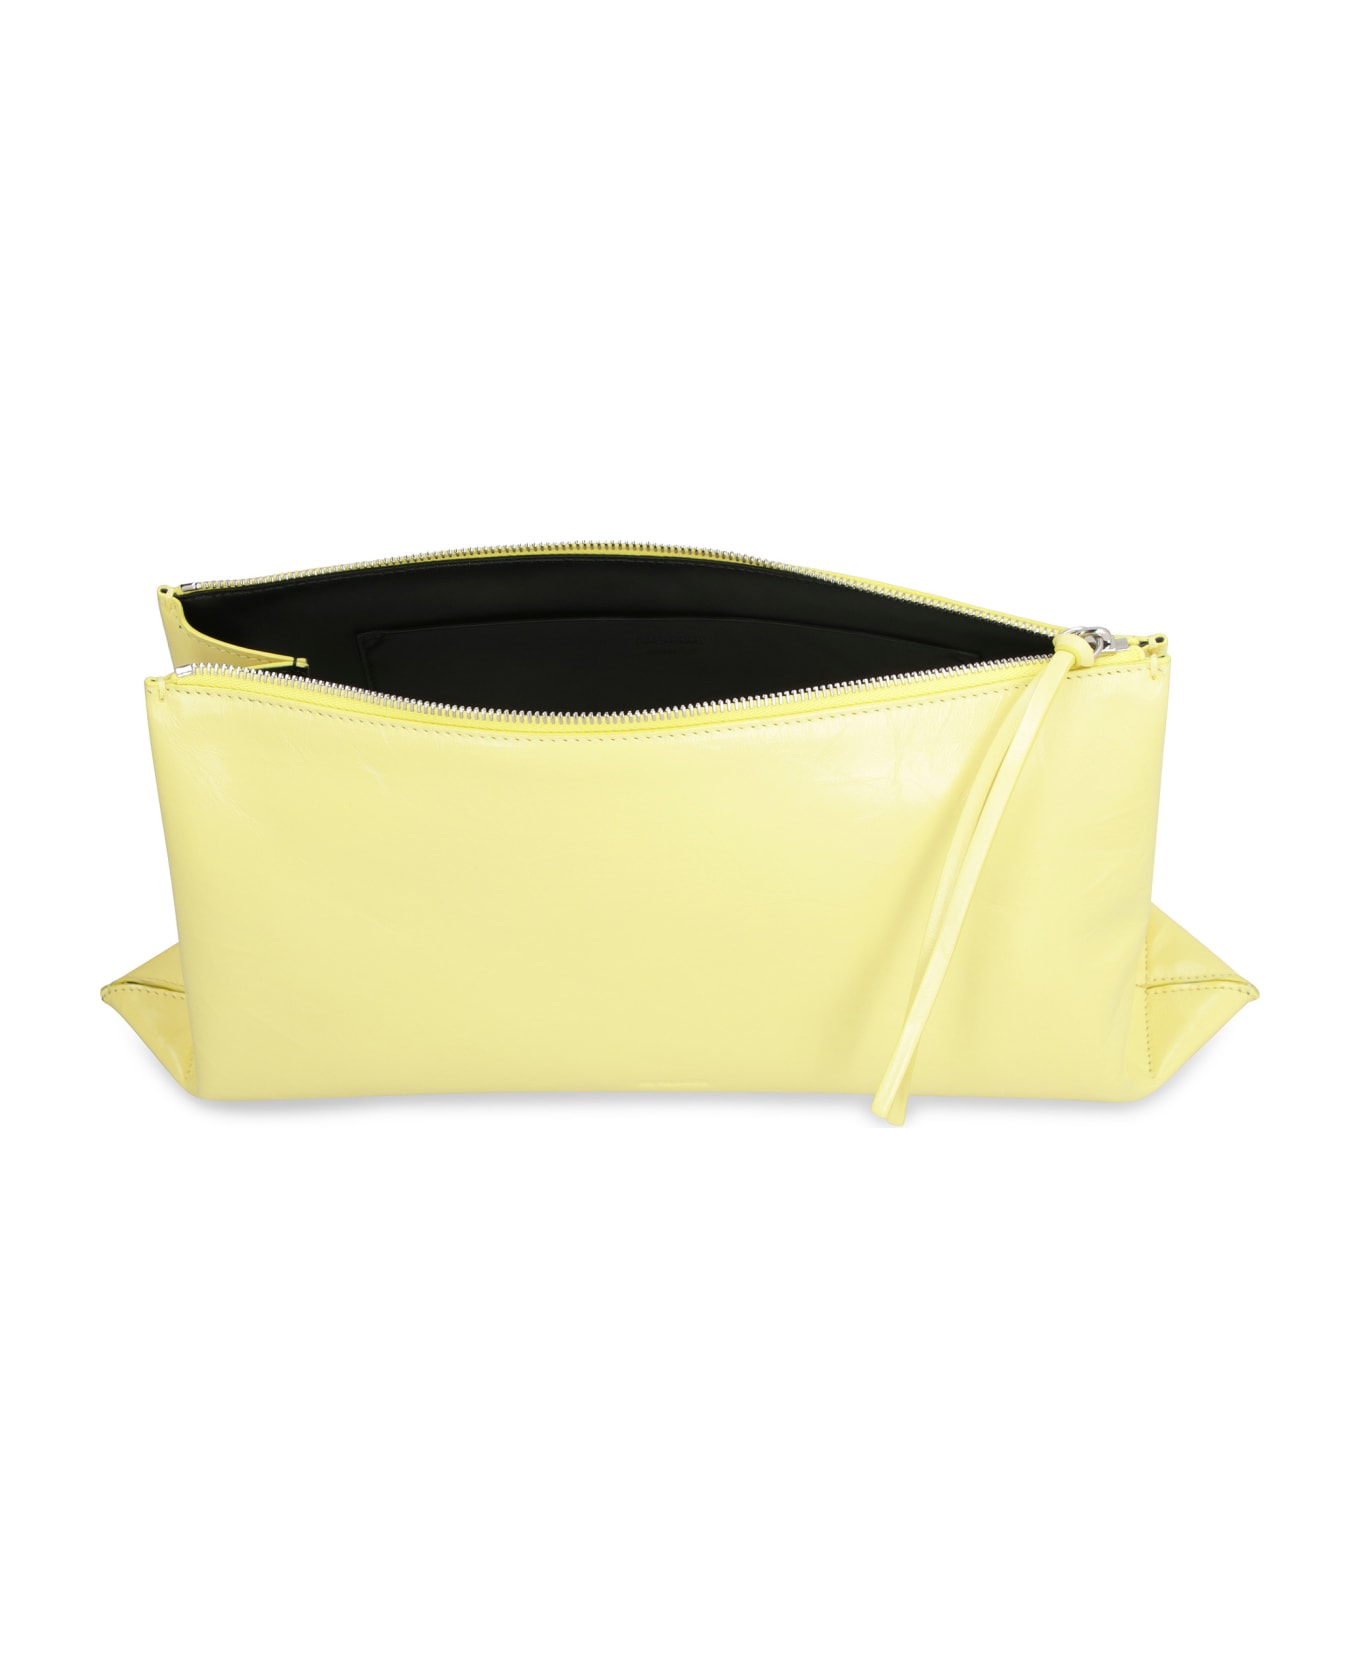 Jil Sander Leather Clutch - Yellow クラッチバッグ